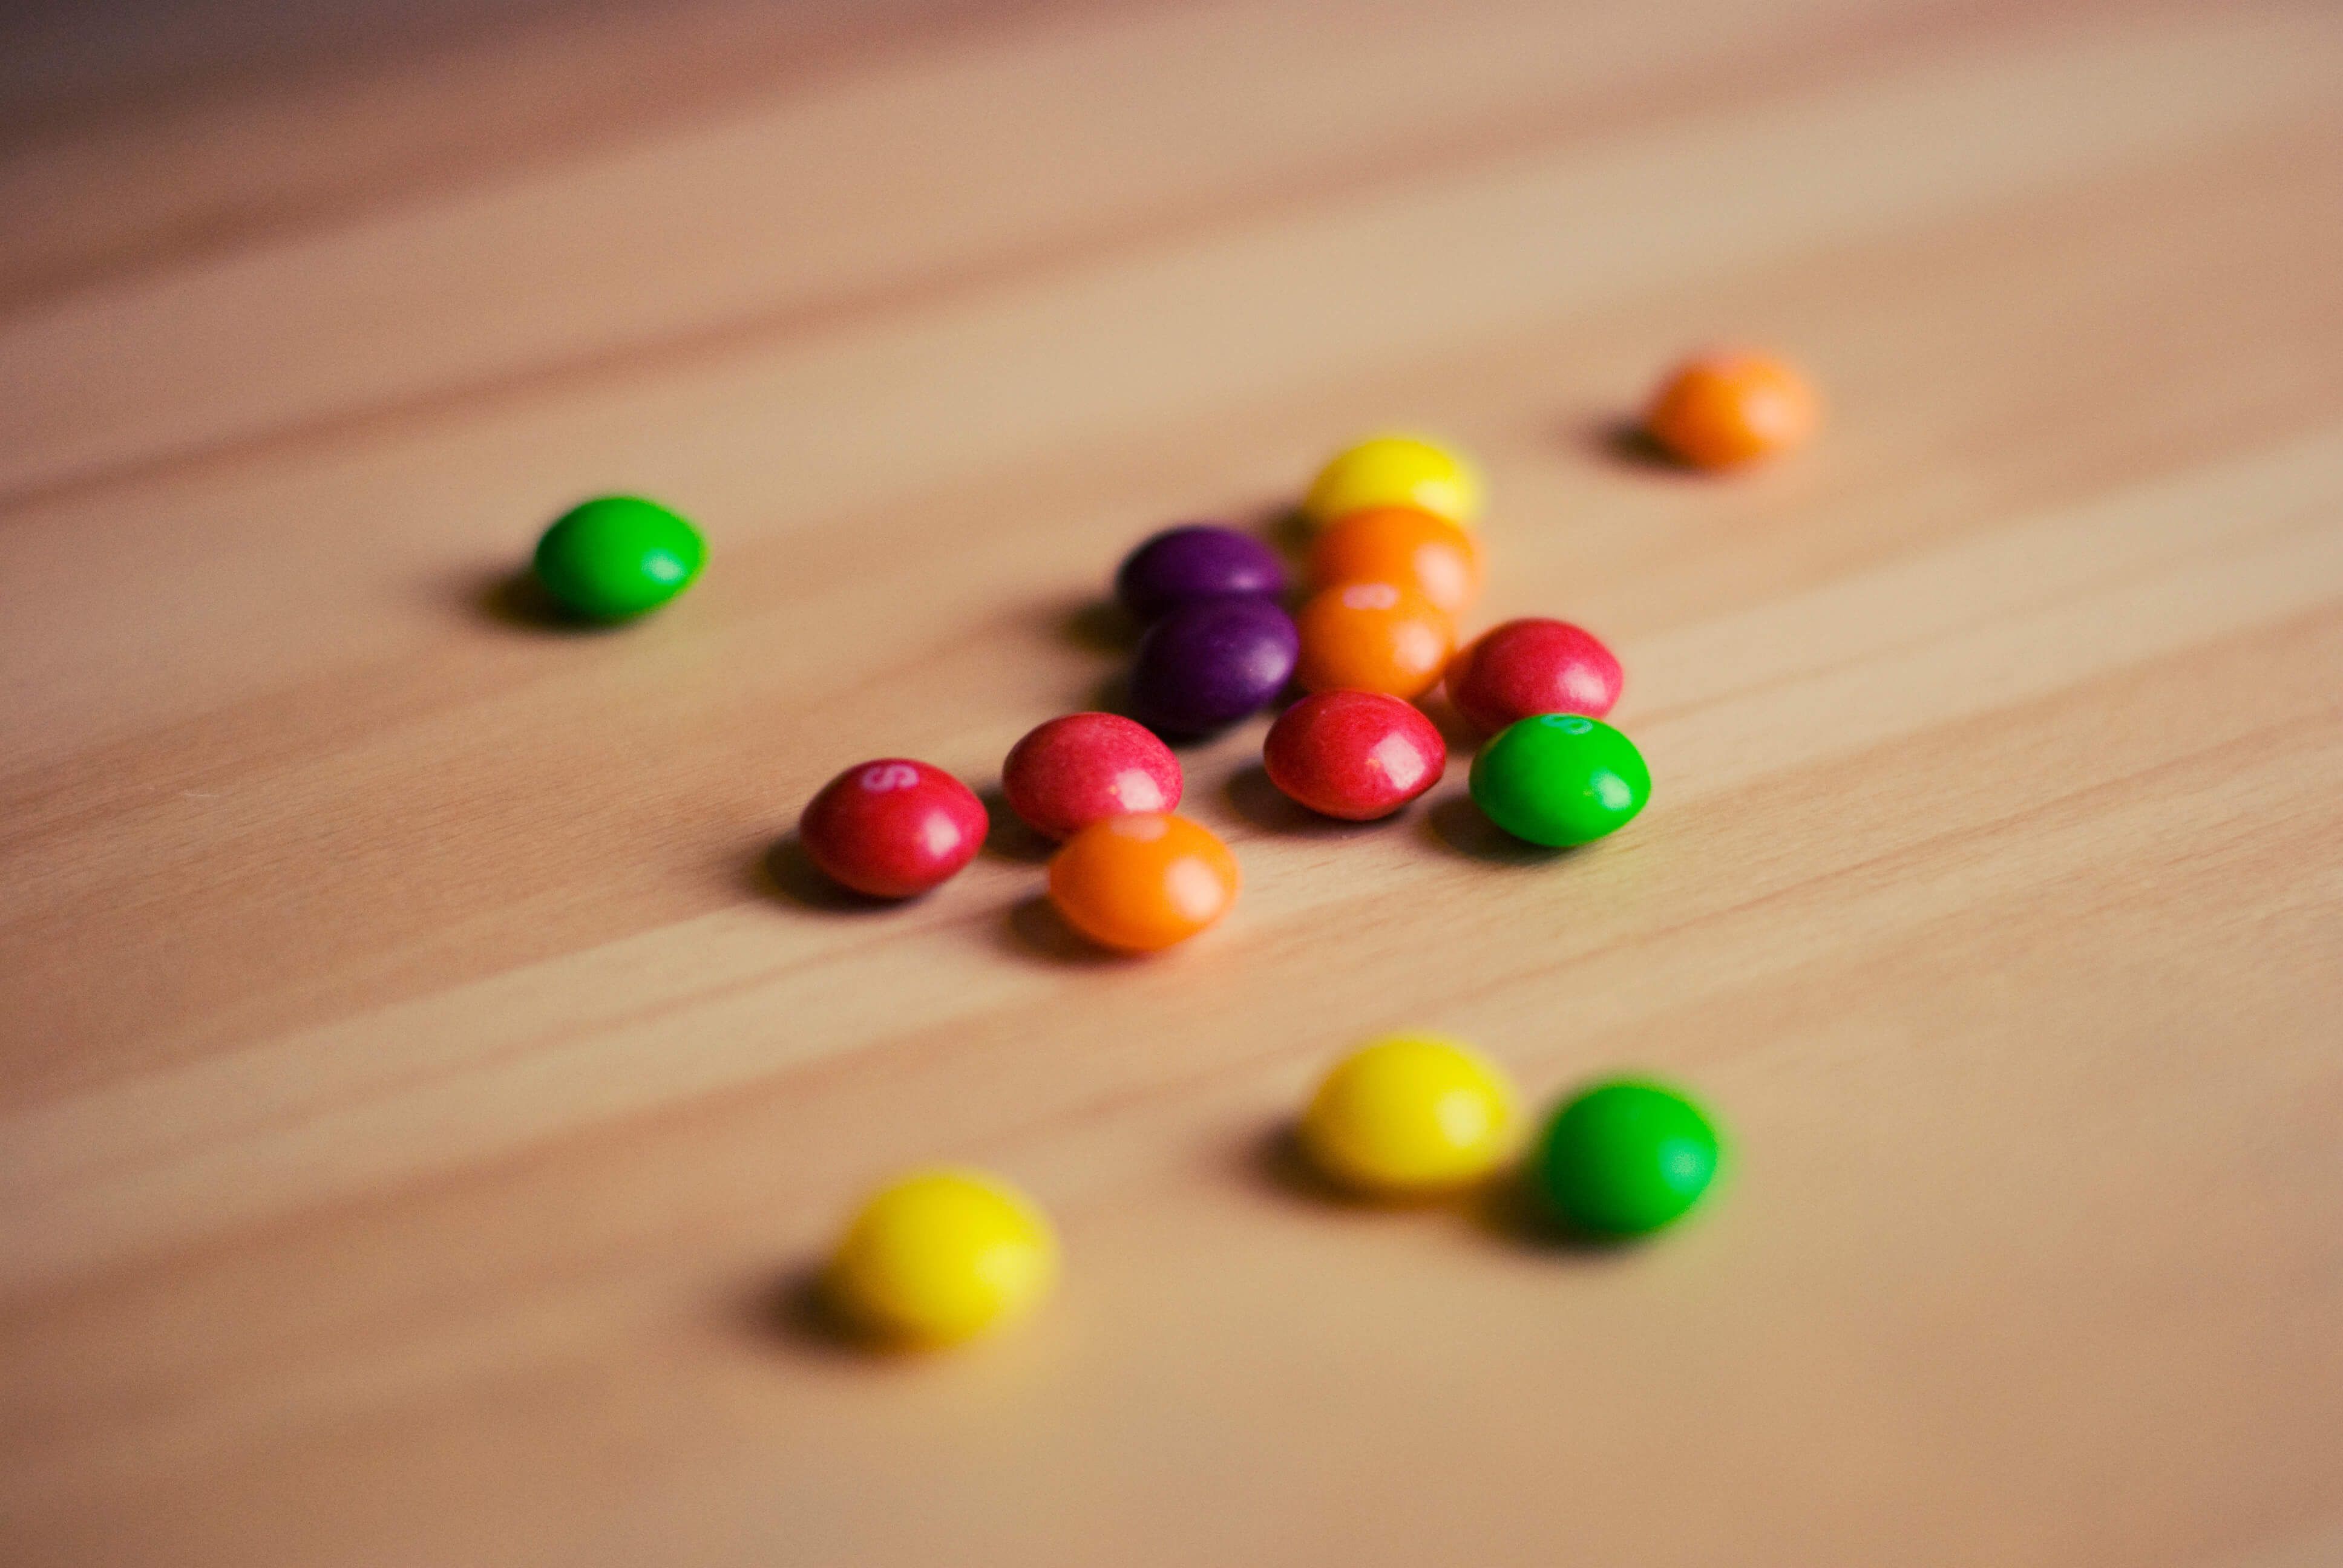 Skittles on a table - How to design clever student council posters, 30 ideas to boost your creativity - Image